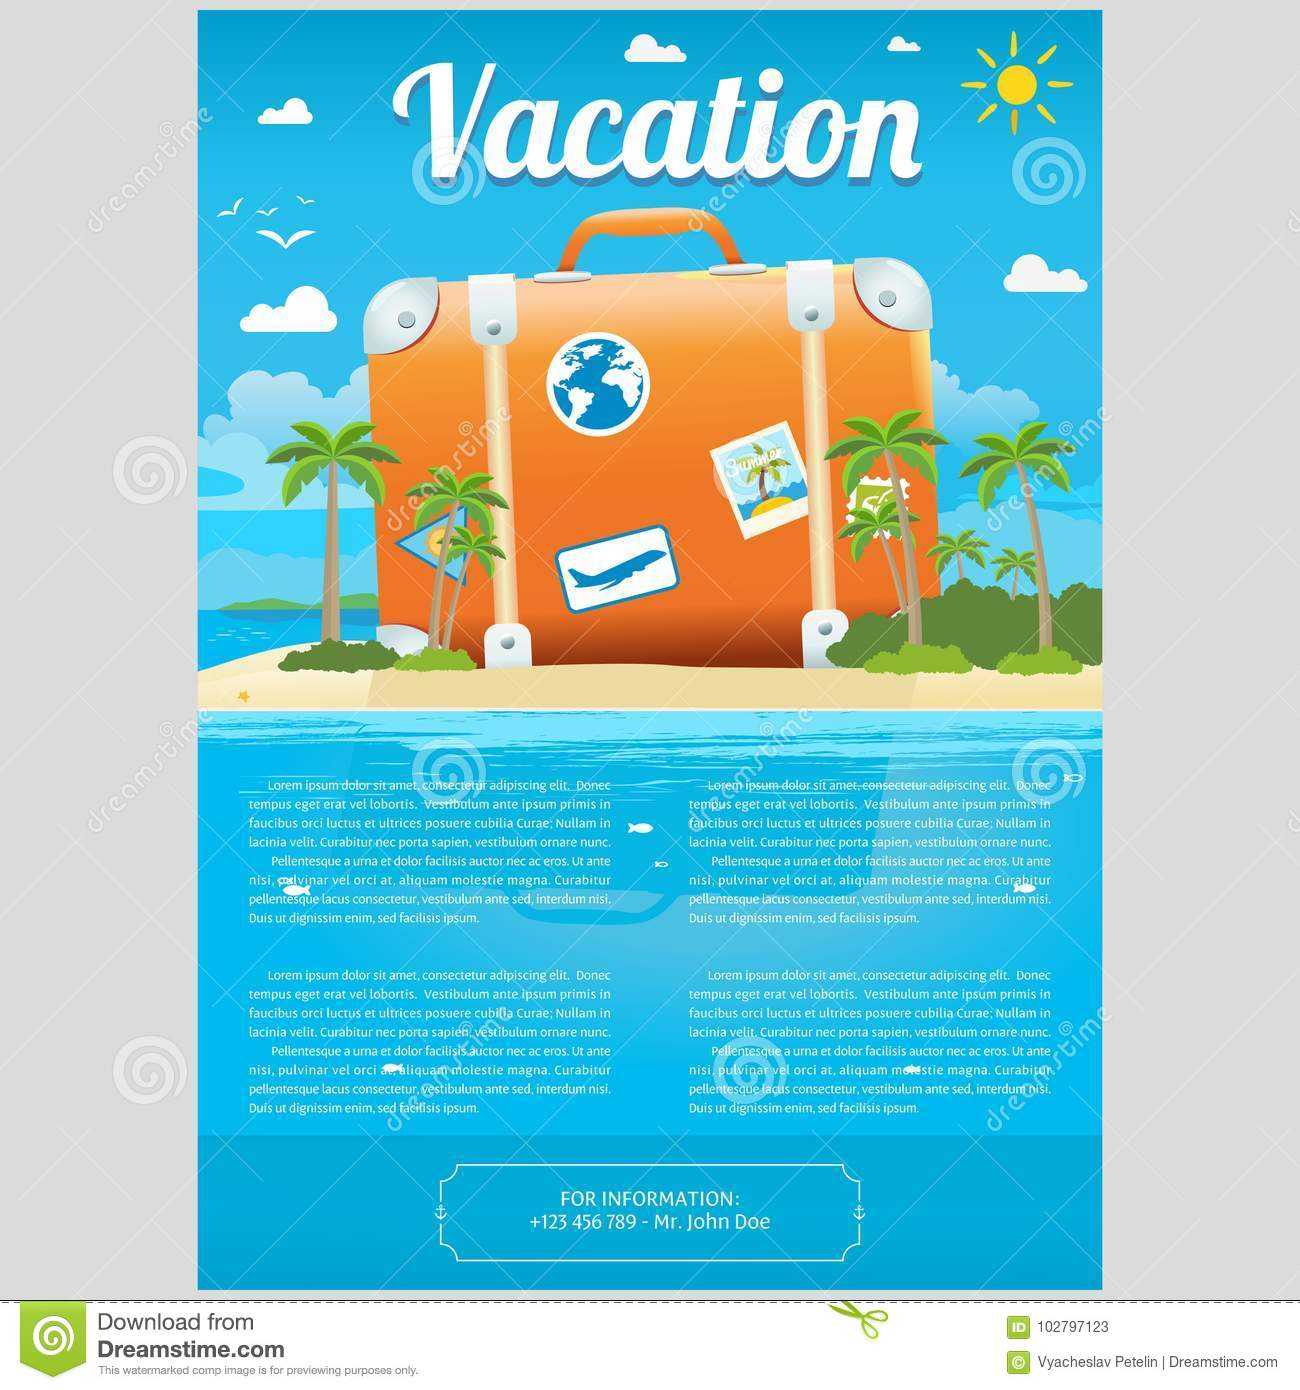 Vector Illustration Of Travel Suitcase On The Sea Island In Island Brochure Template